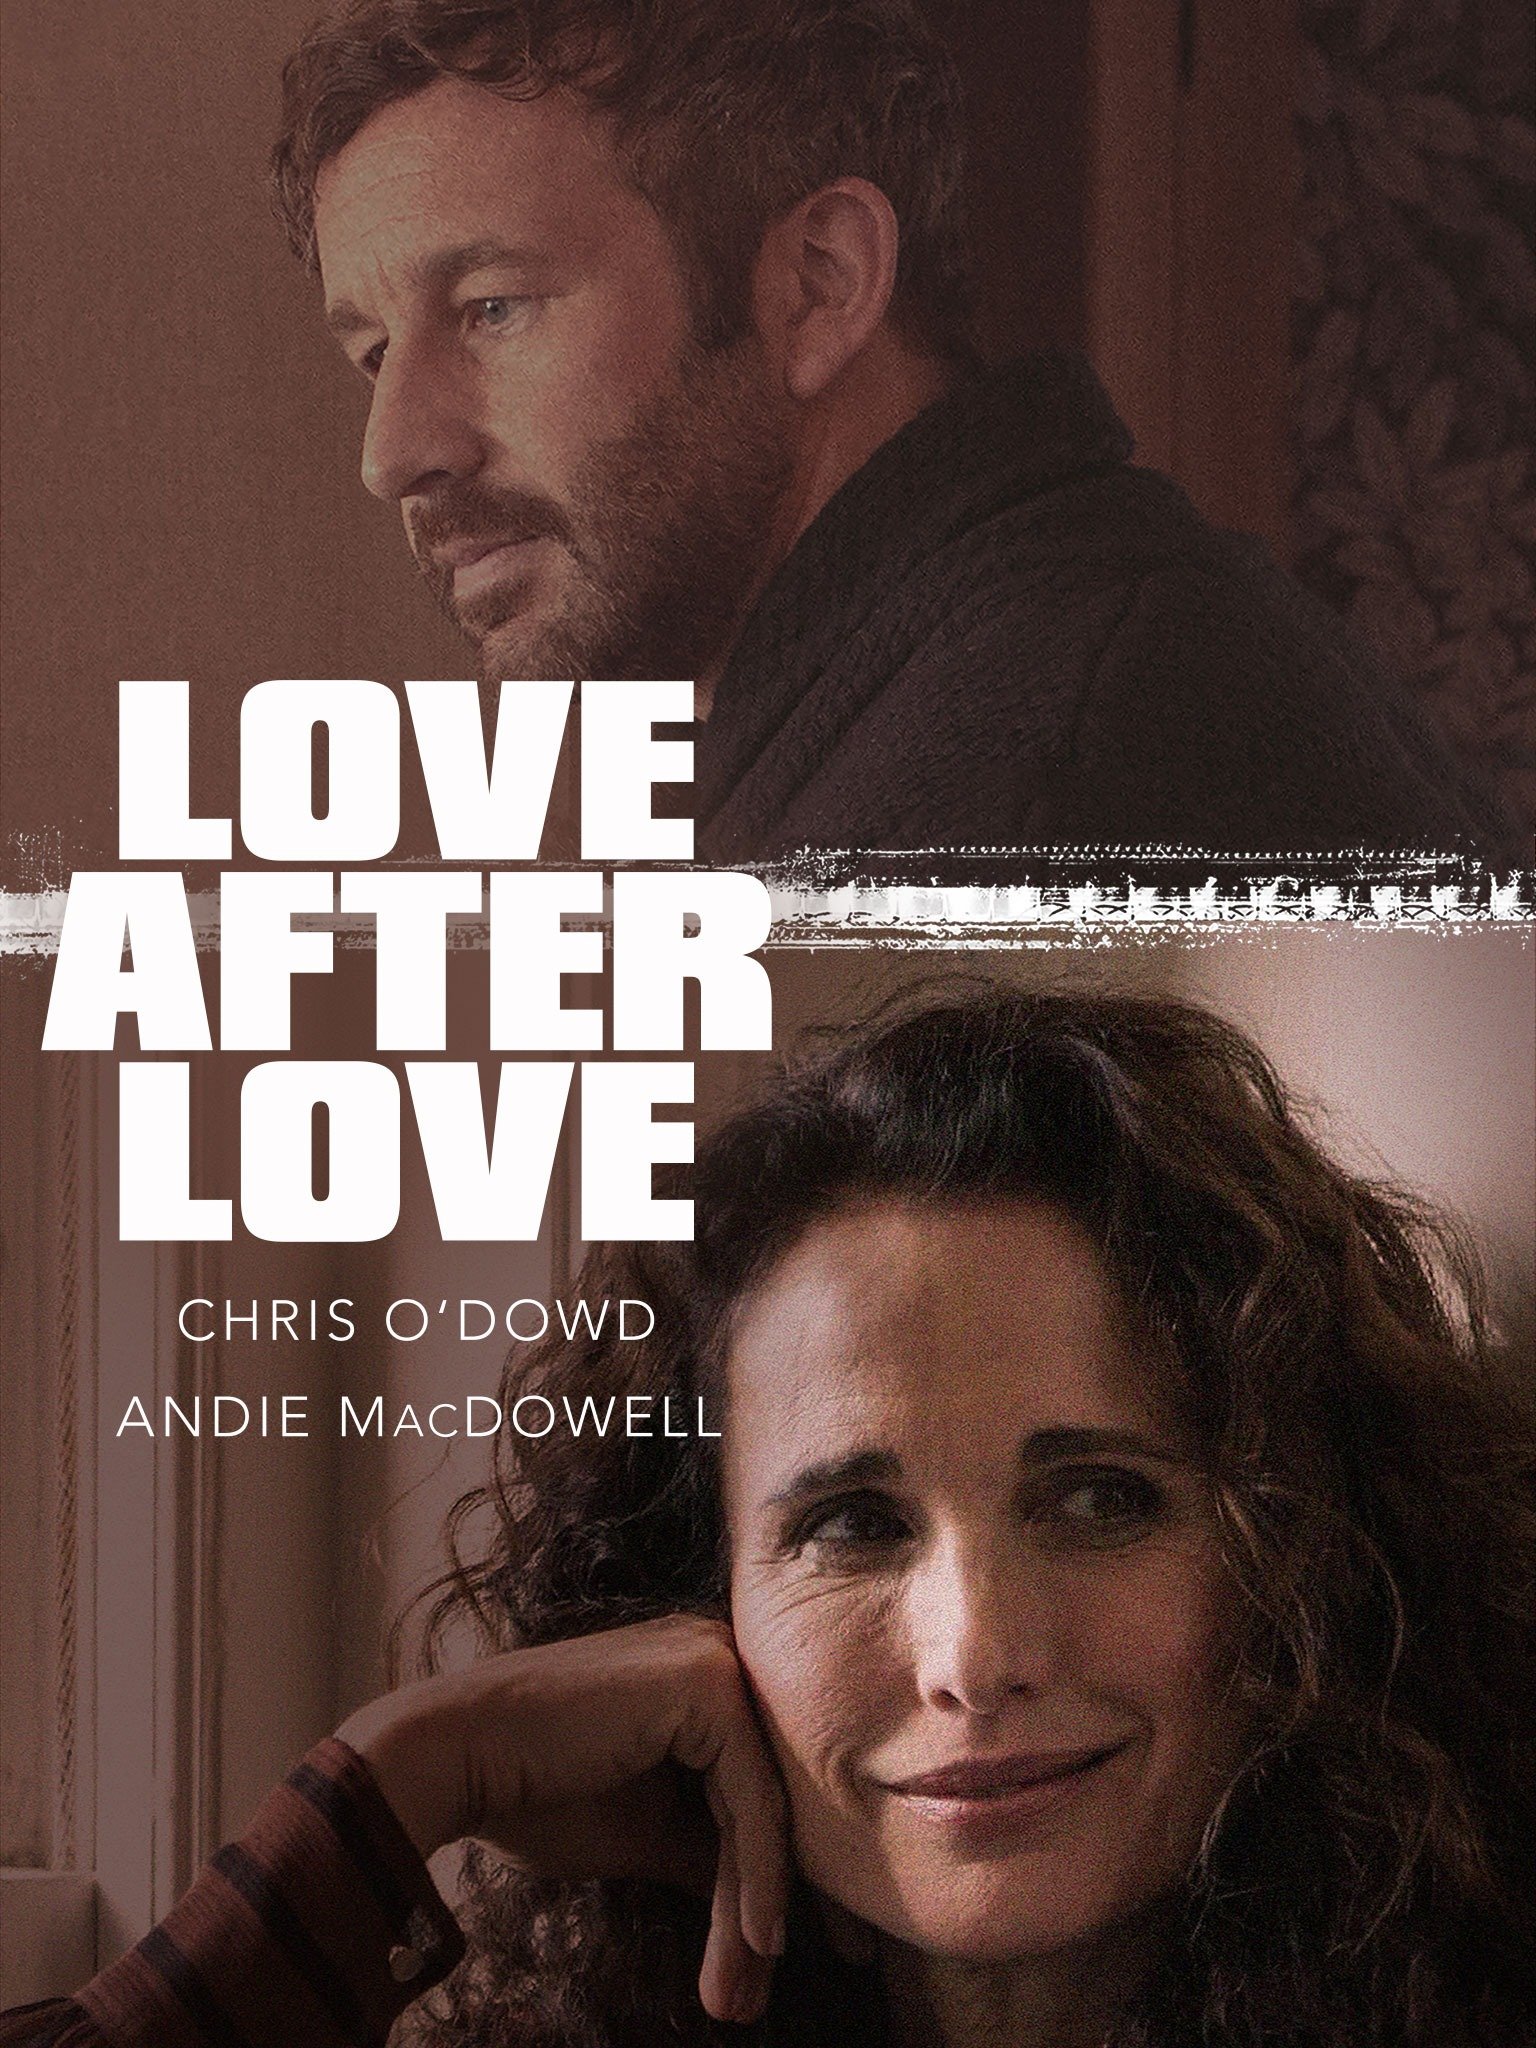 love after love movie review